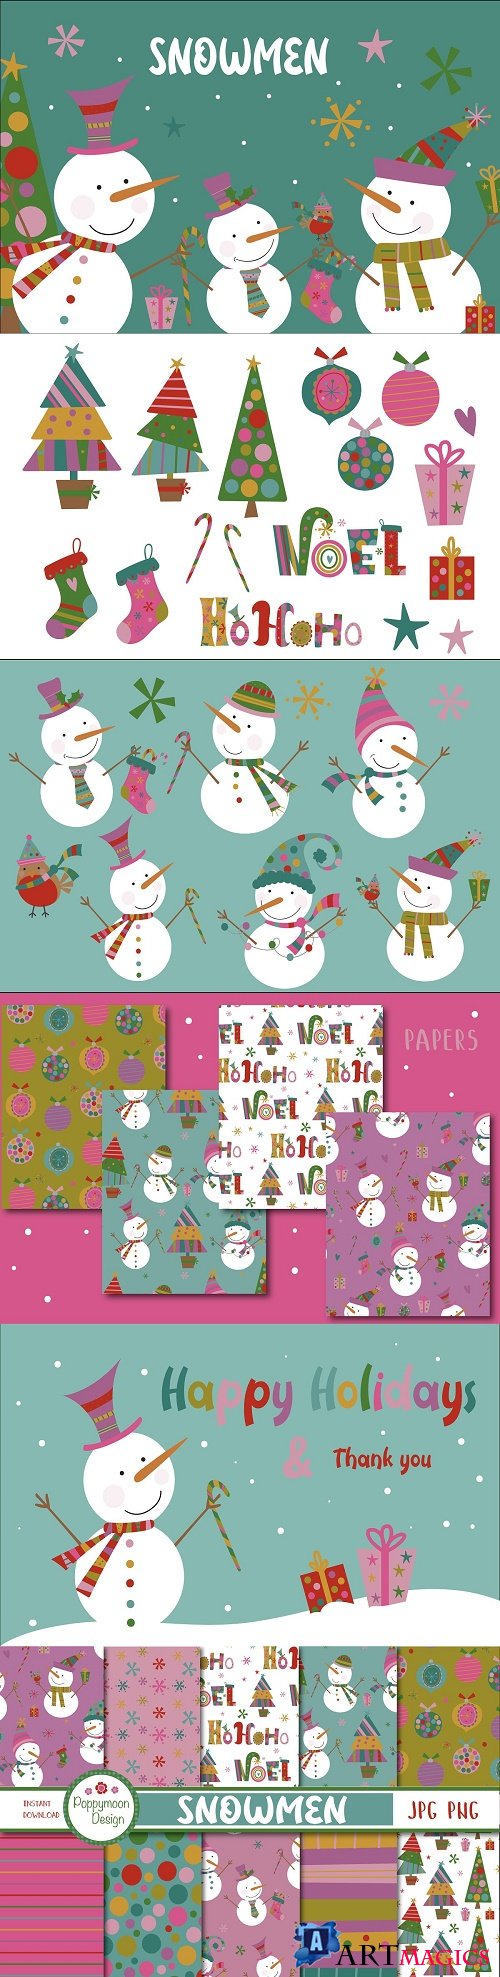 Snowmen clipart and paper - 4250053 - 4250069